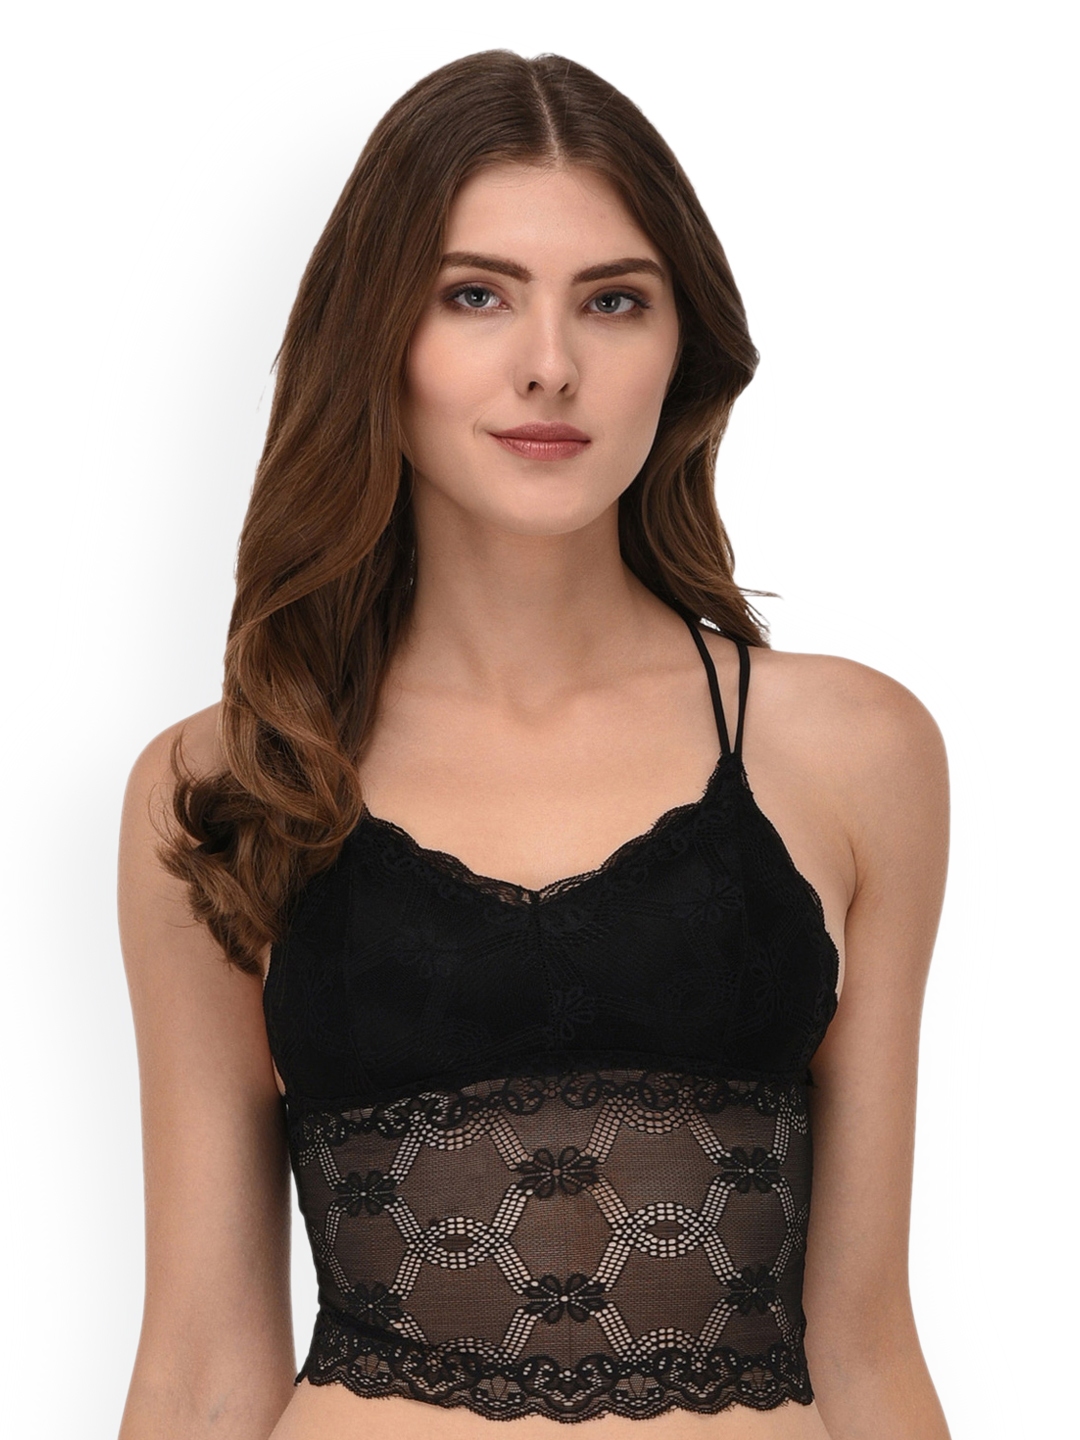 Buy Quttos Black Lace Non Wired Lightly Padded Bralette Bra QT SB 616 BLK  30A - Bra for Women 7697566